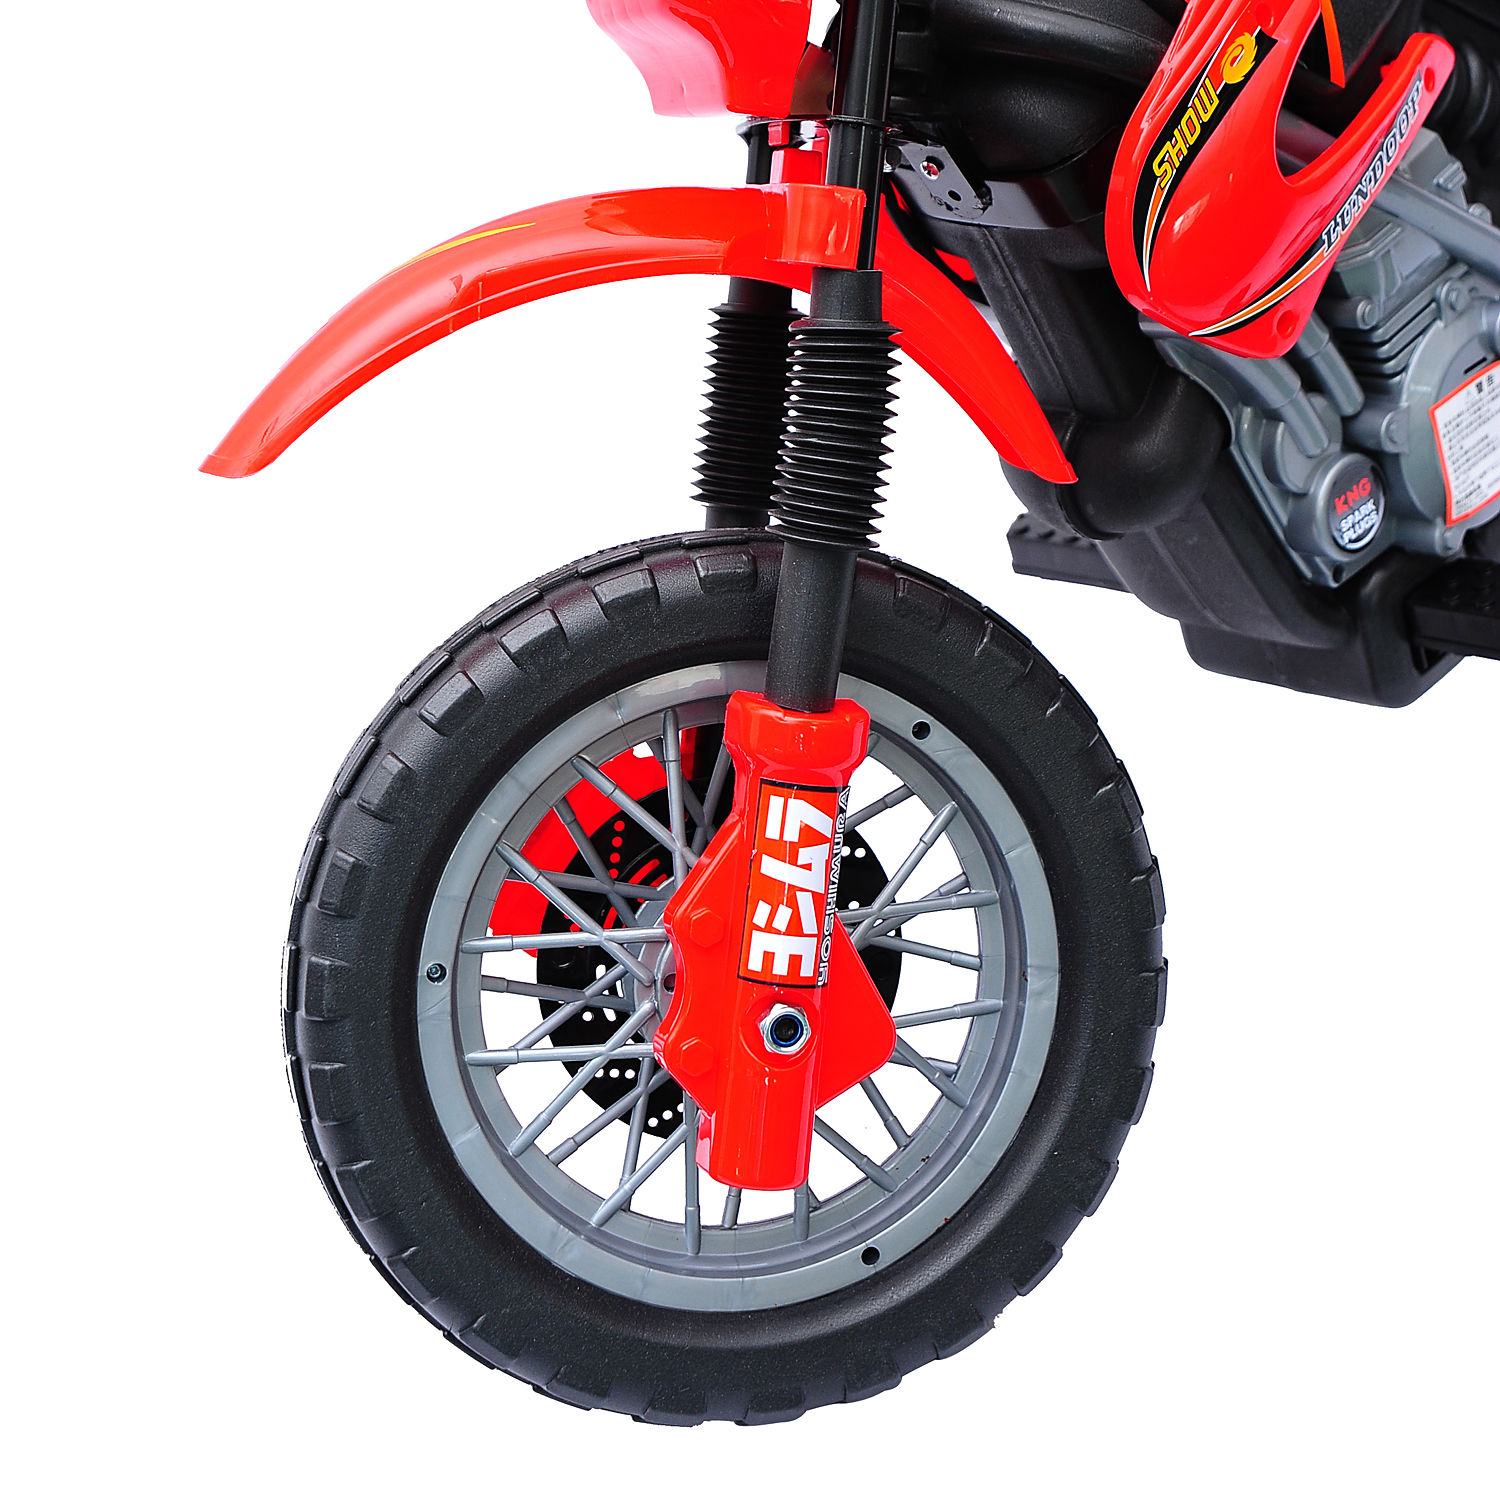 Maboto 6V Kids Electric Battery-Powered Ride-On Motorcycle Outdoor Recreation Dirt Bike Toy with Training Wheels for 3 - 6 Years Old - Red - image 3 of 7